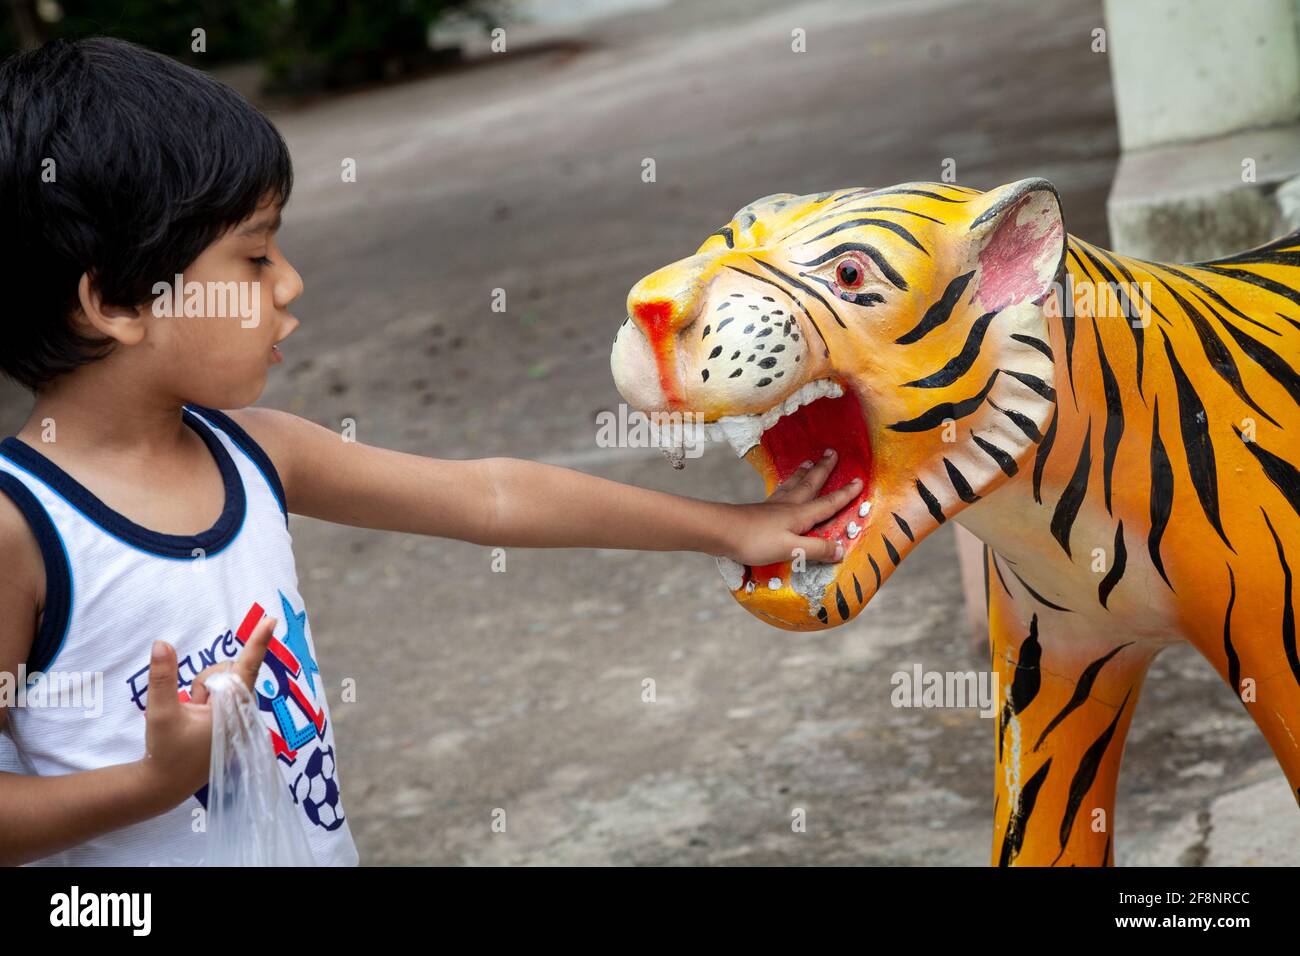 View of a young boy putting his hand inside the mouth of a lion statue at the famous Big Buddha place in Pattaya, Thailand. Stock Photo